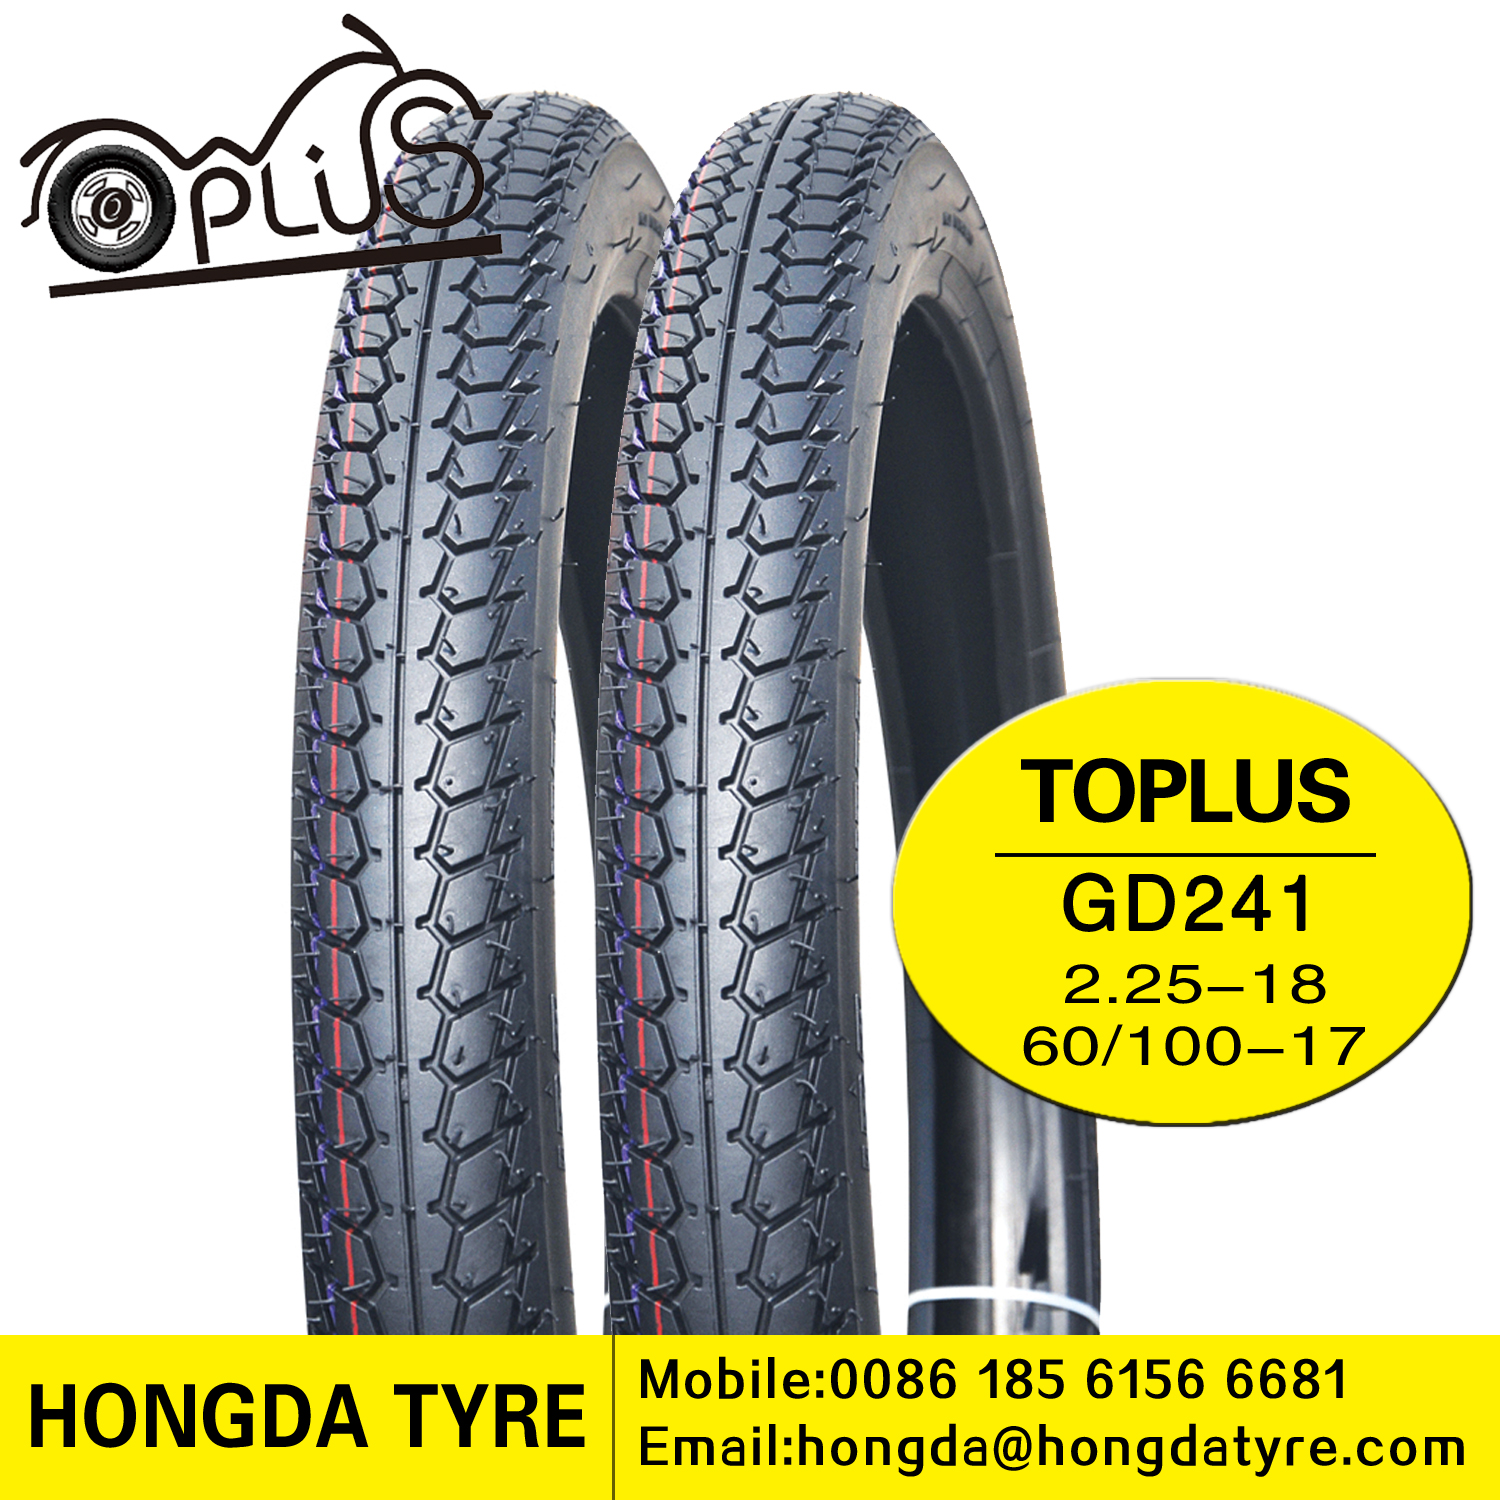 Motorcycle tyre GD241